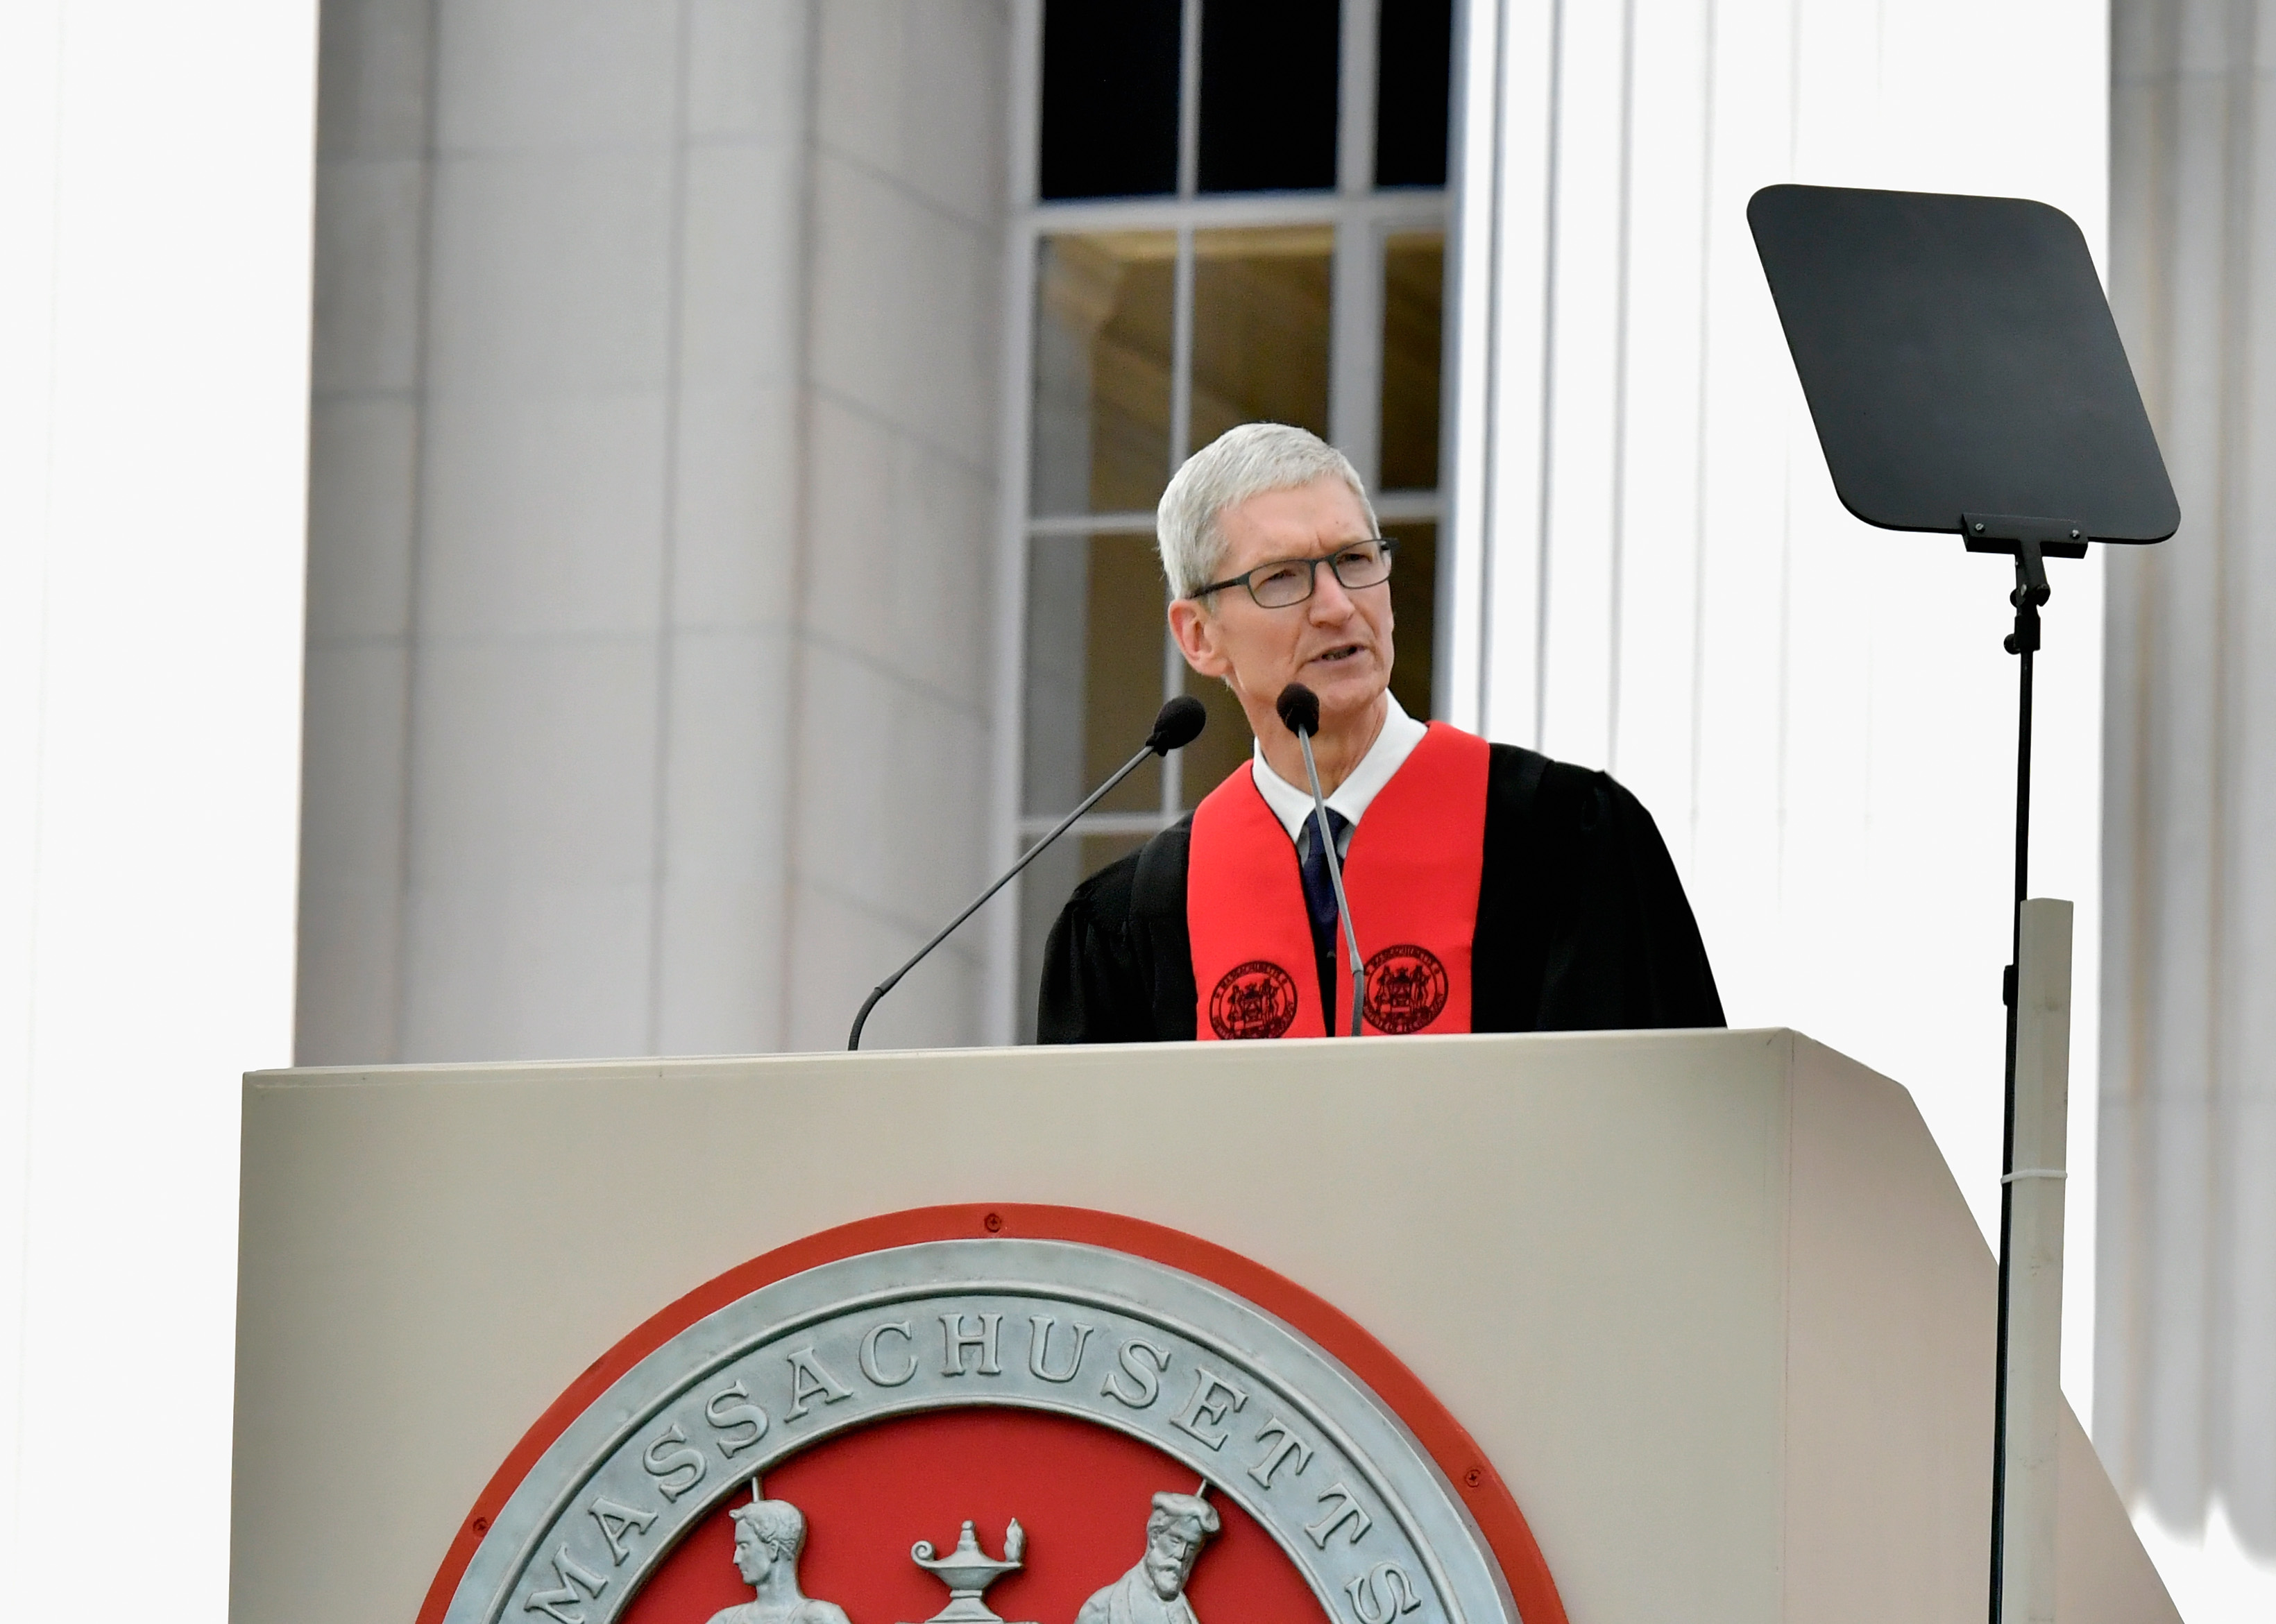 Tim Cook, Apple, MIT commencement